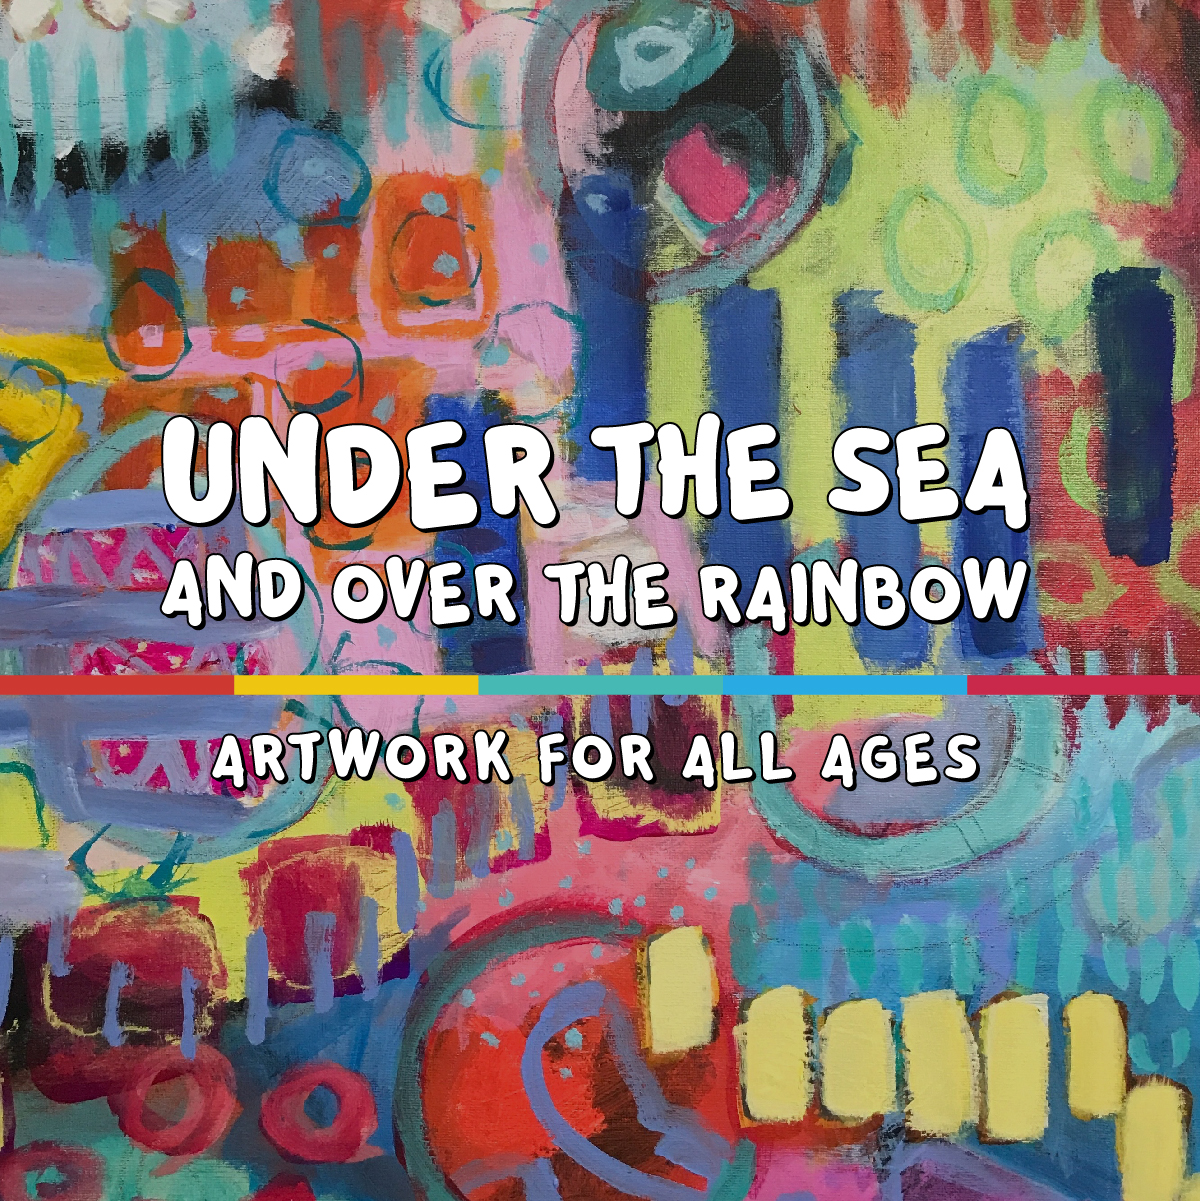 Under the Sea Exhibition logo on a painted colorful abstract background